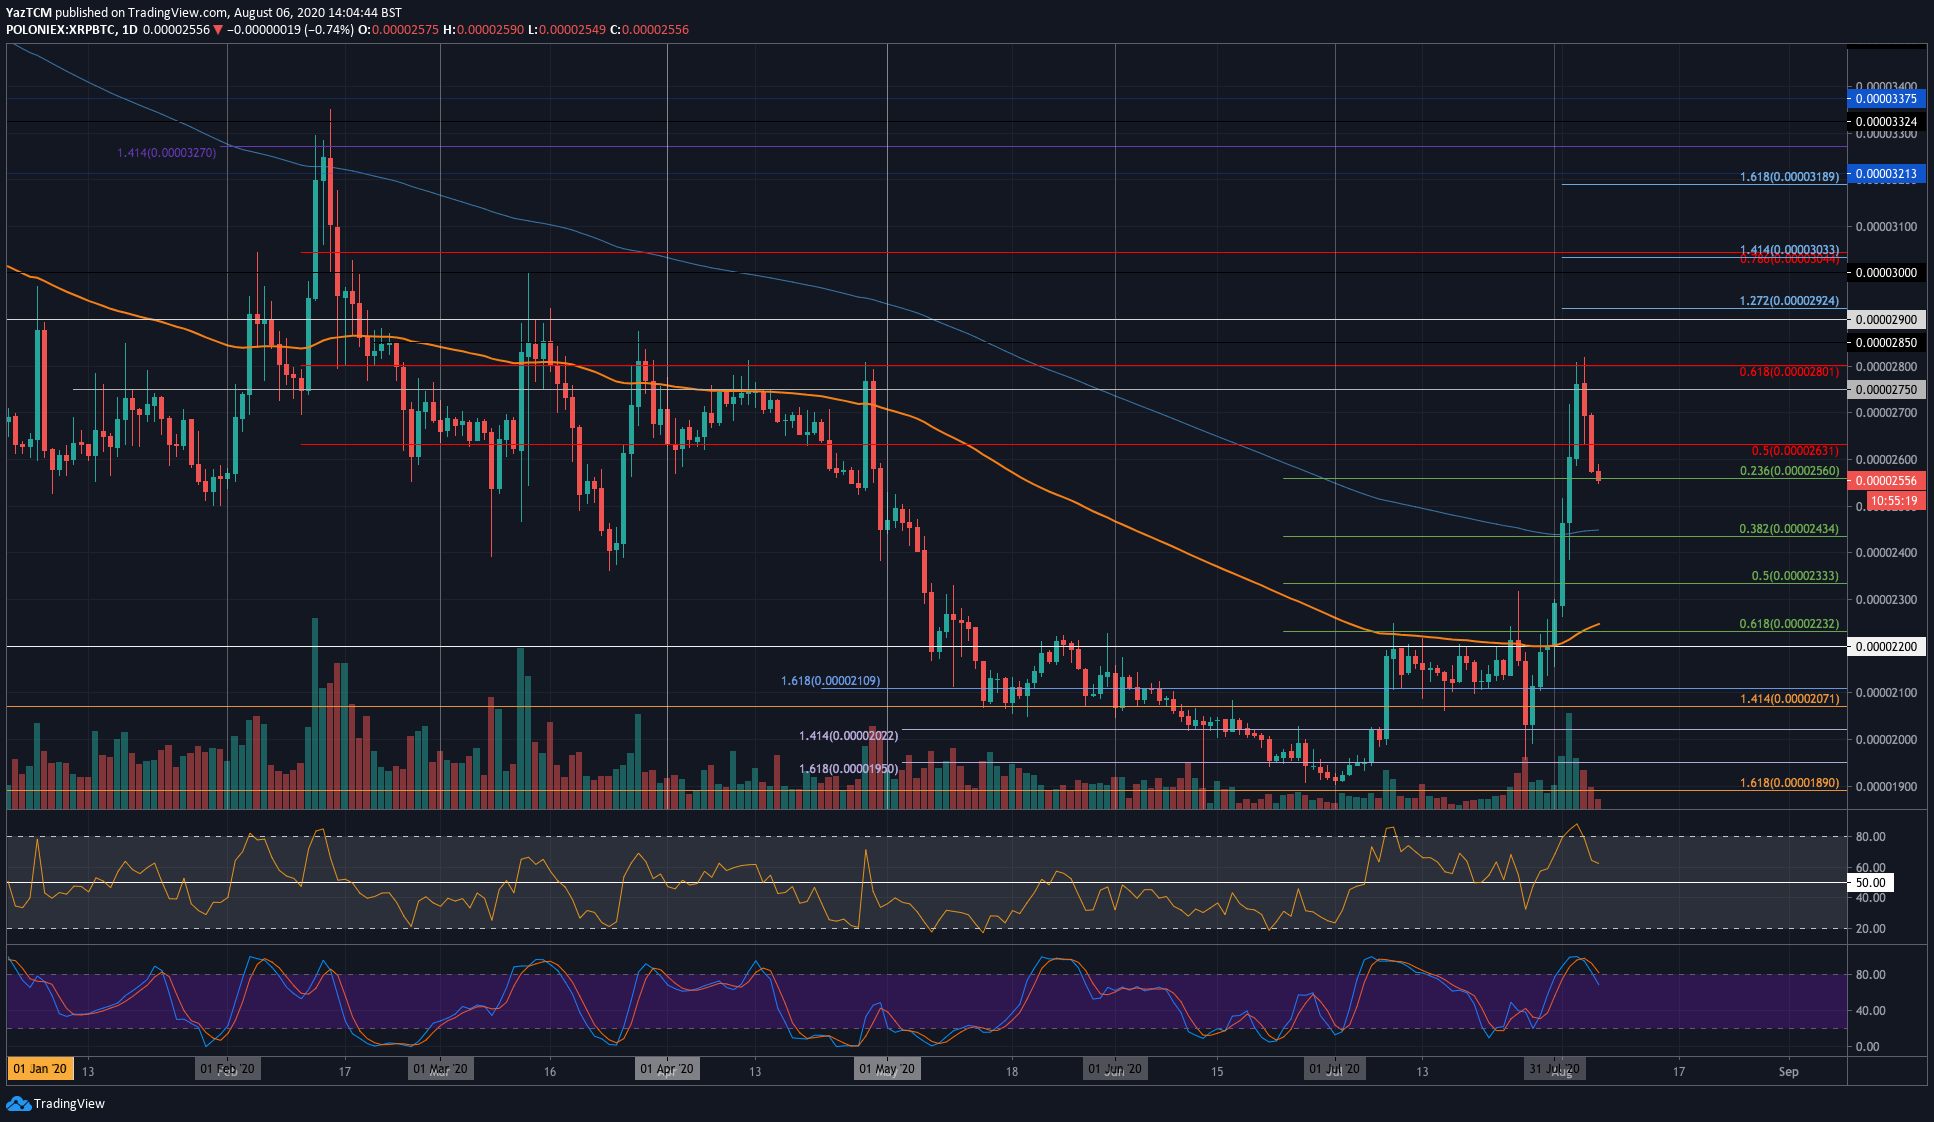 Ripple’s $0.3 Sideways Action May End With a Huge Move (XRP Price Analysis)